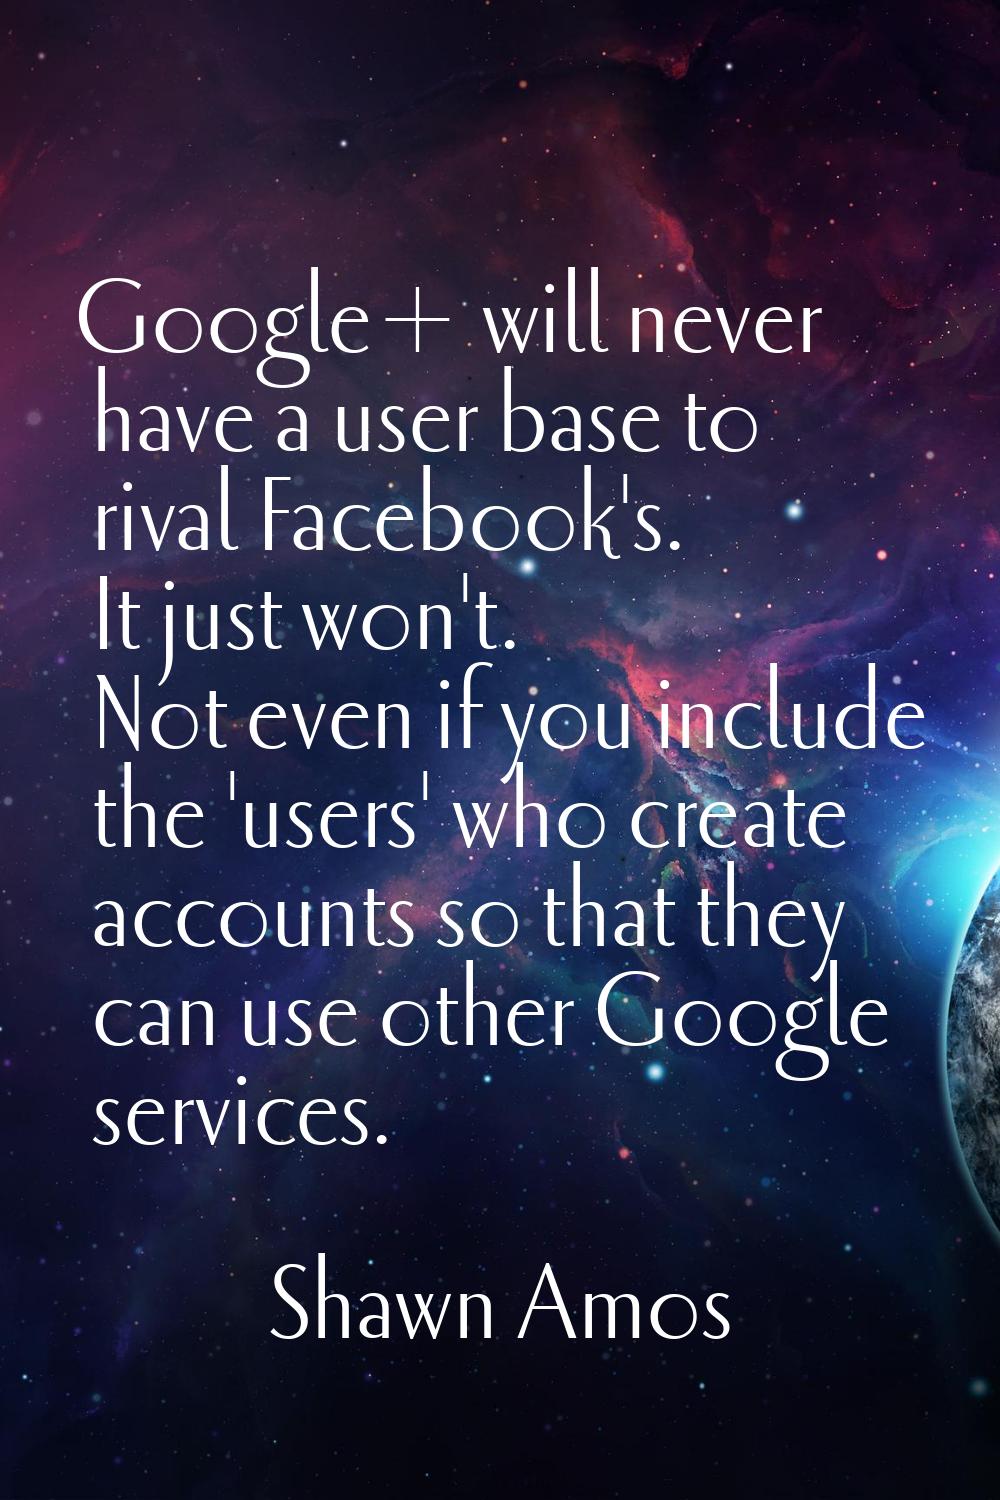 Google+ will never have a user base to rival Facebook's. It just won't. Not even if you include the